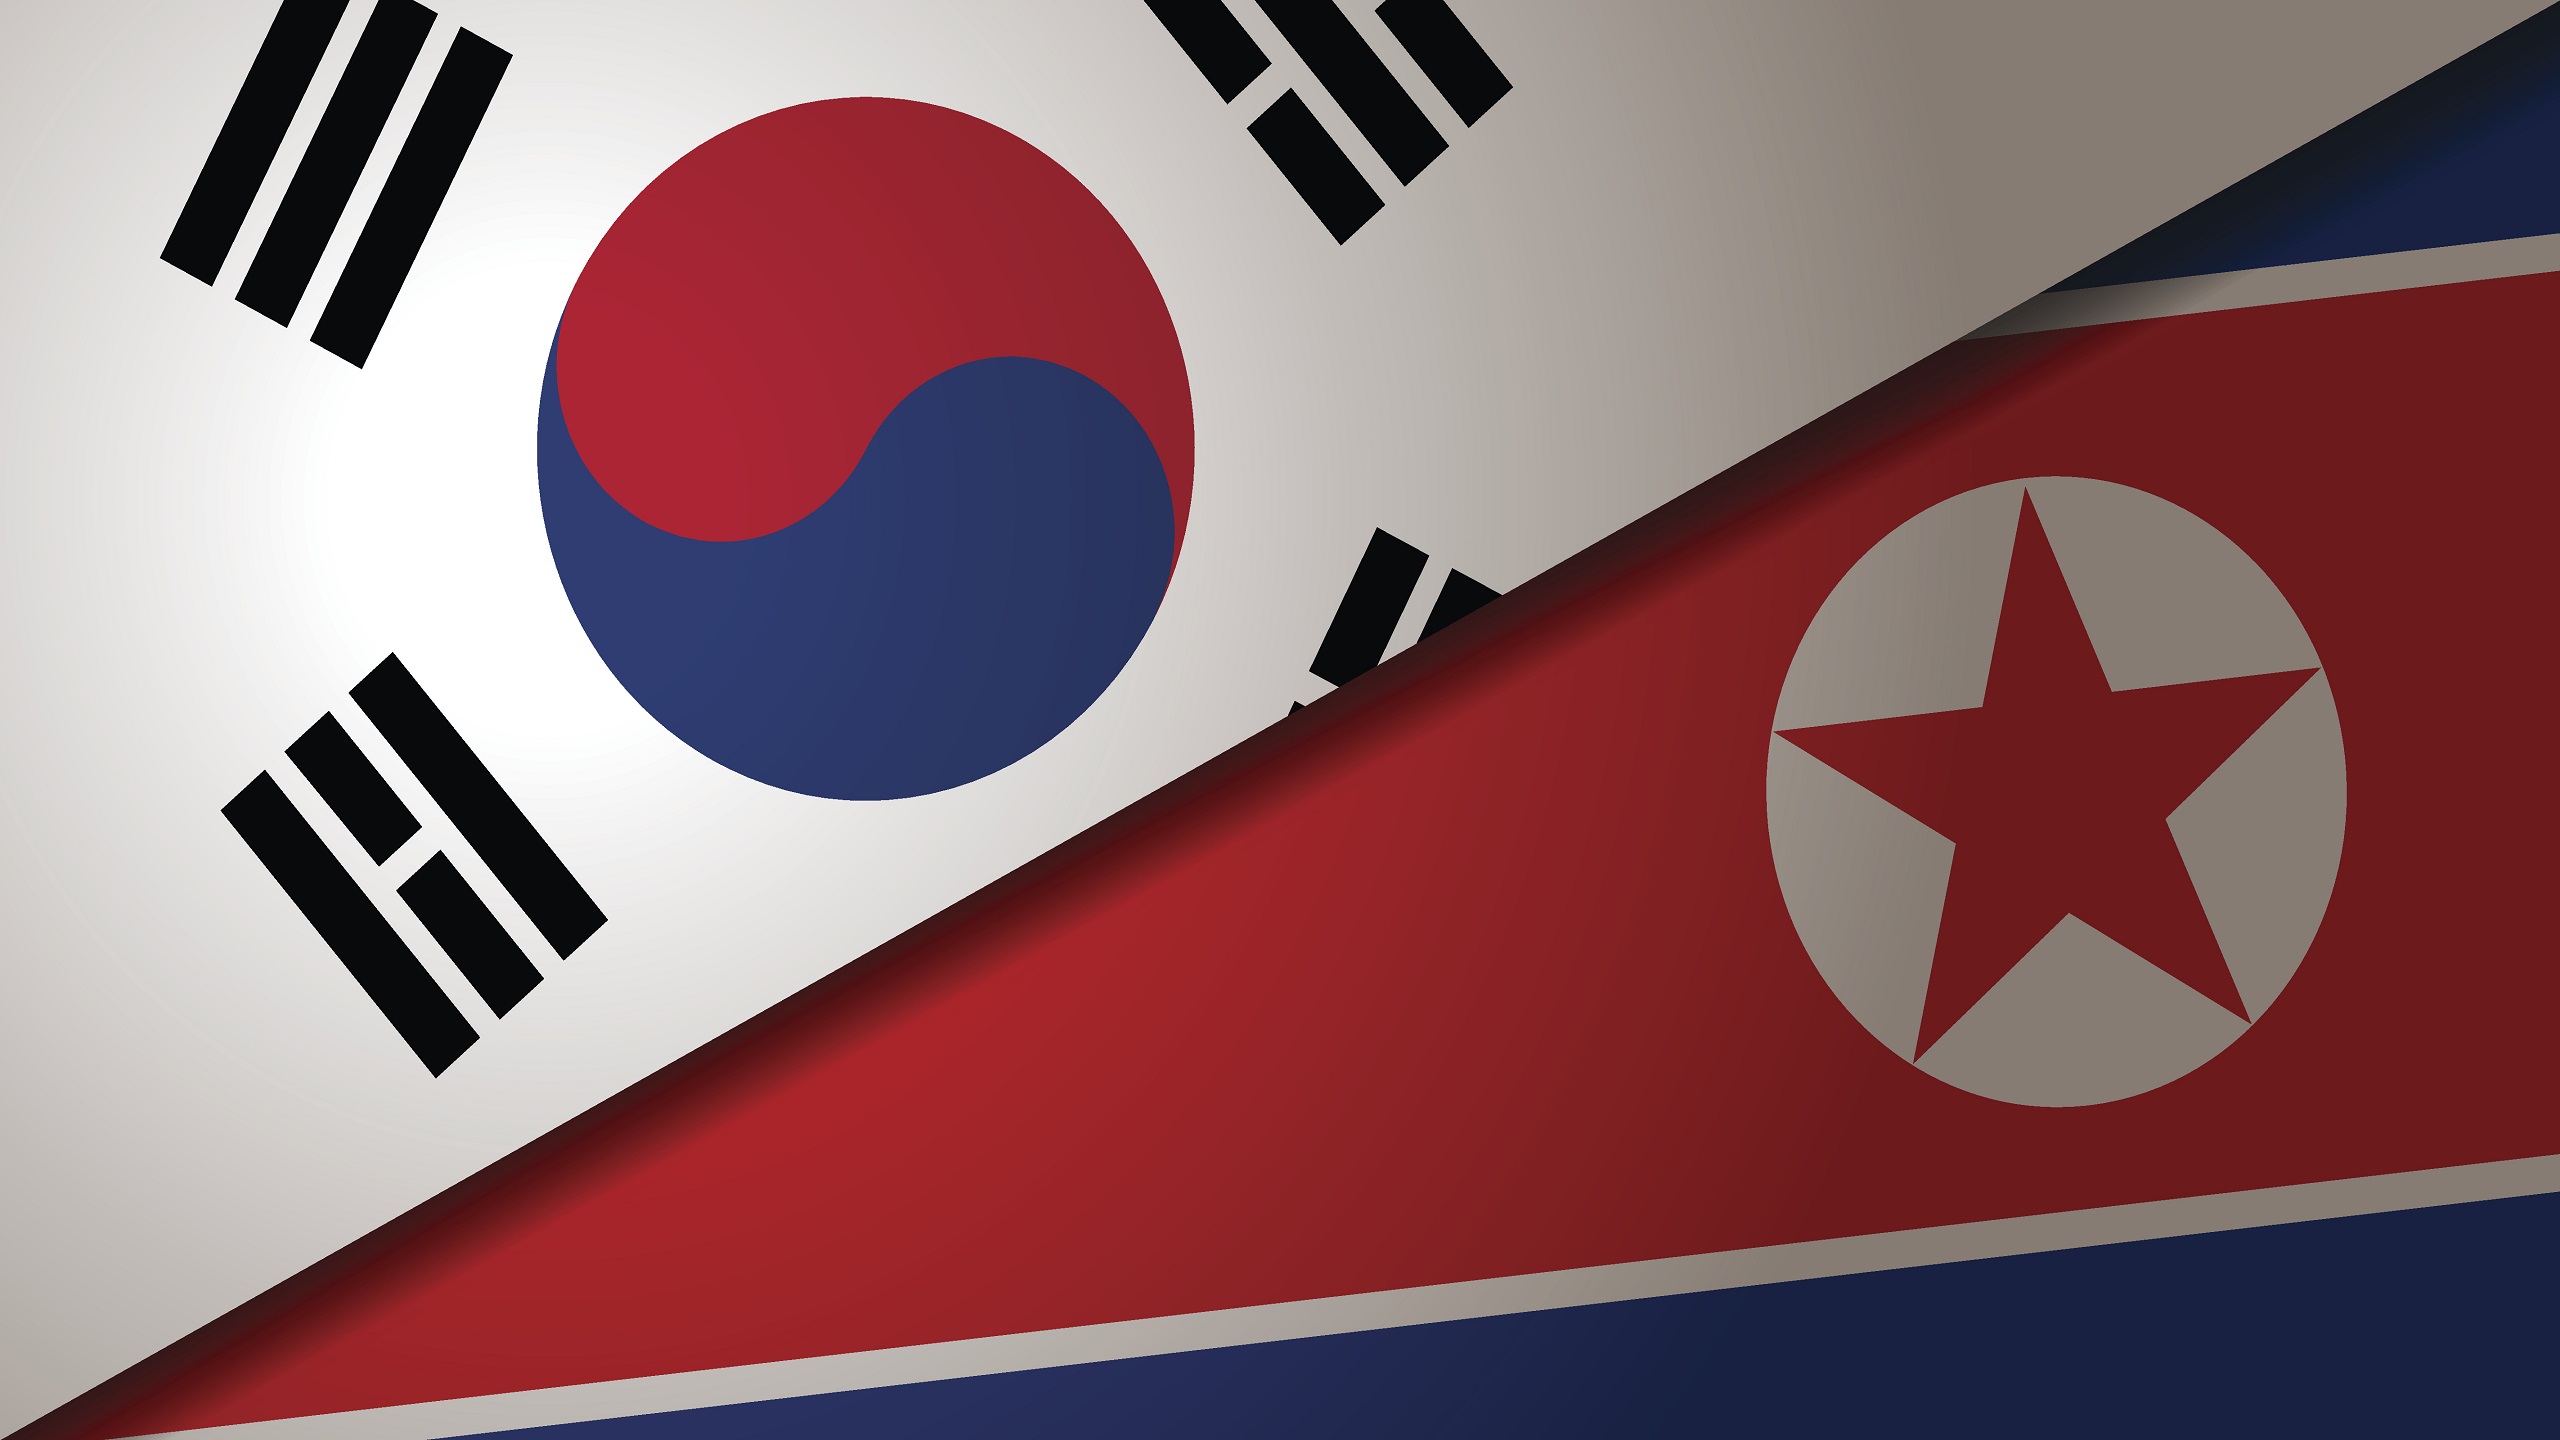 Which of the 2 Koreas Do We Want To Be?